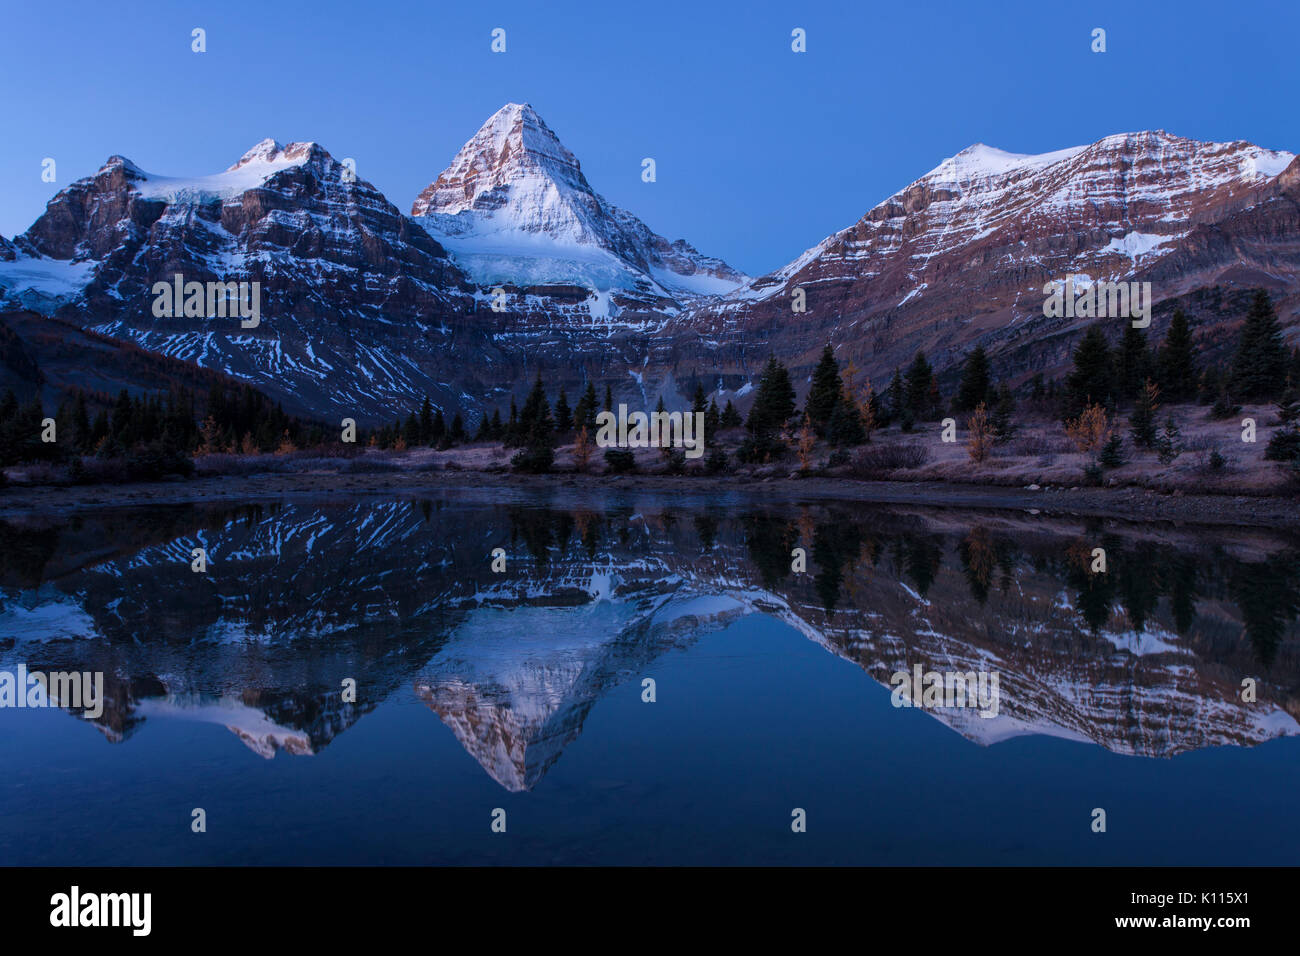 Mount Assiniboine reflected in a tarn near Lage Magog before sunrise, Mount Assiniboine Provincial Park, Rocky Mountains, British Columbia, Canada. Stock Photo